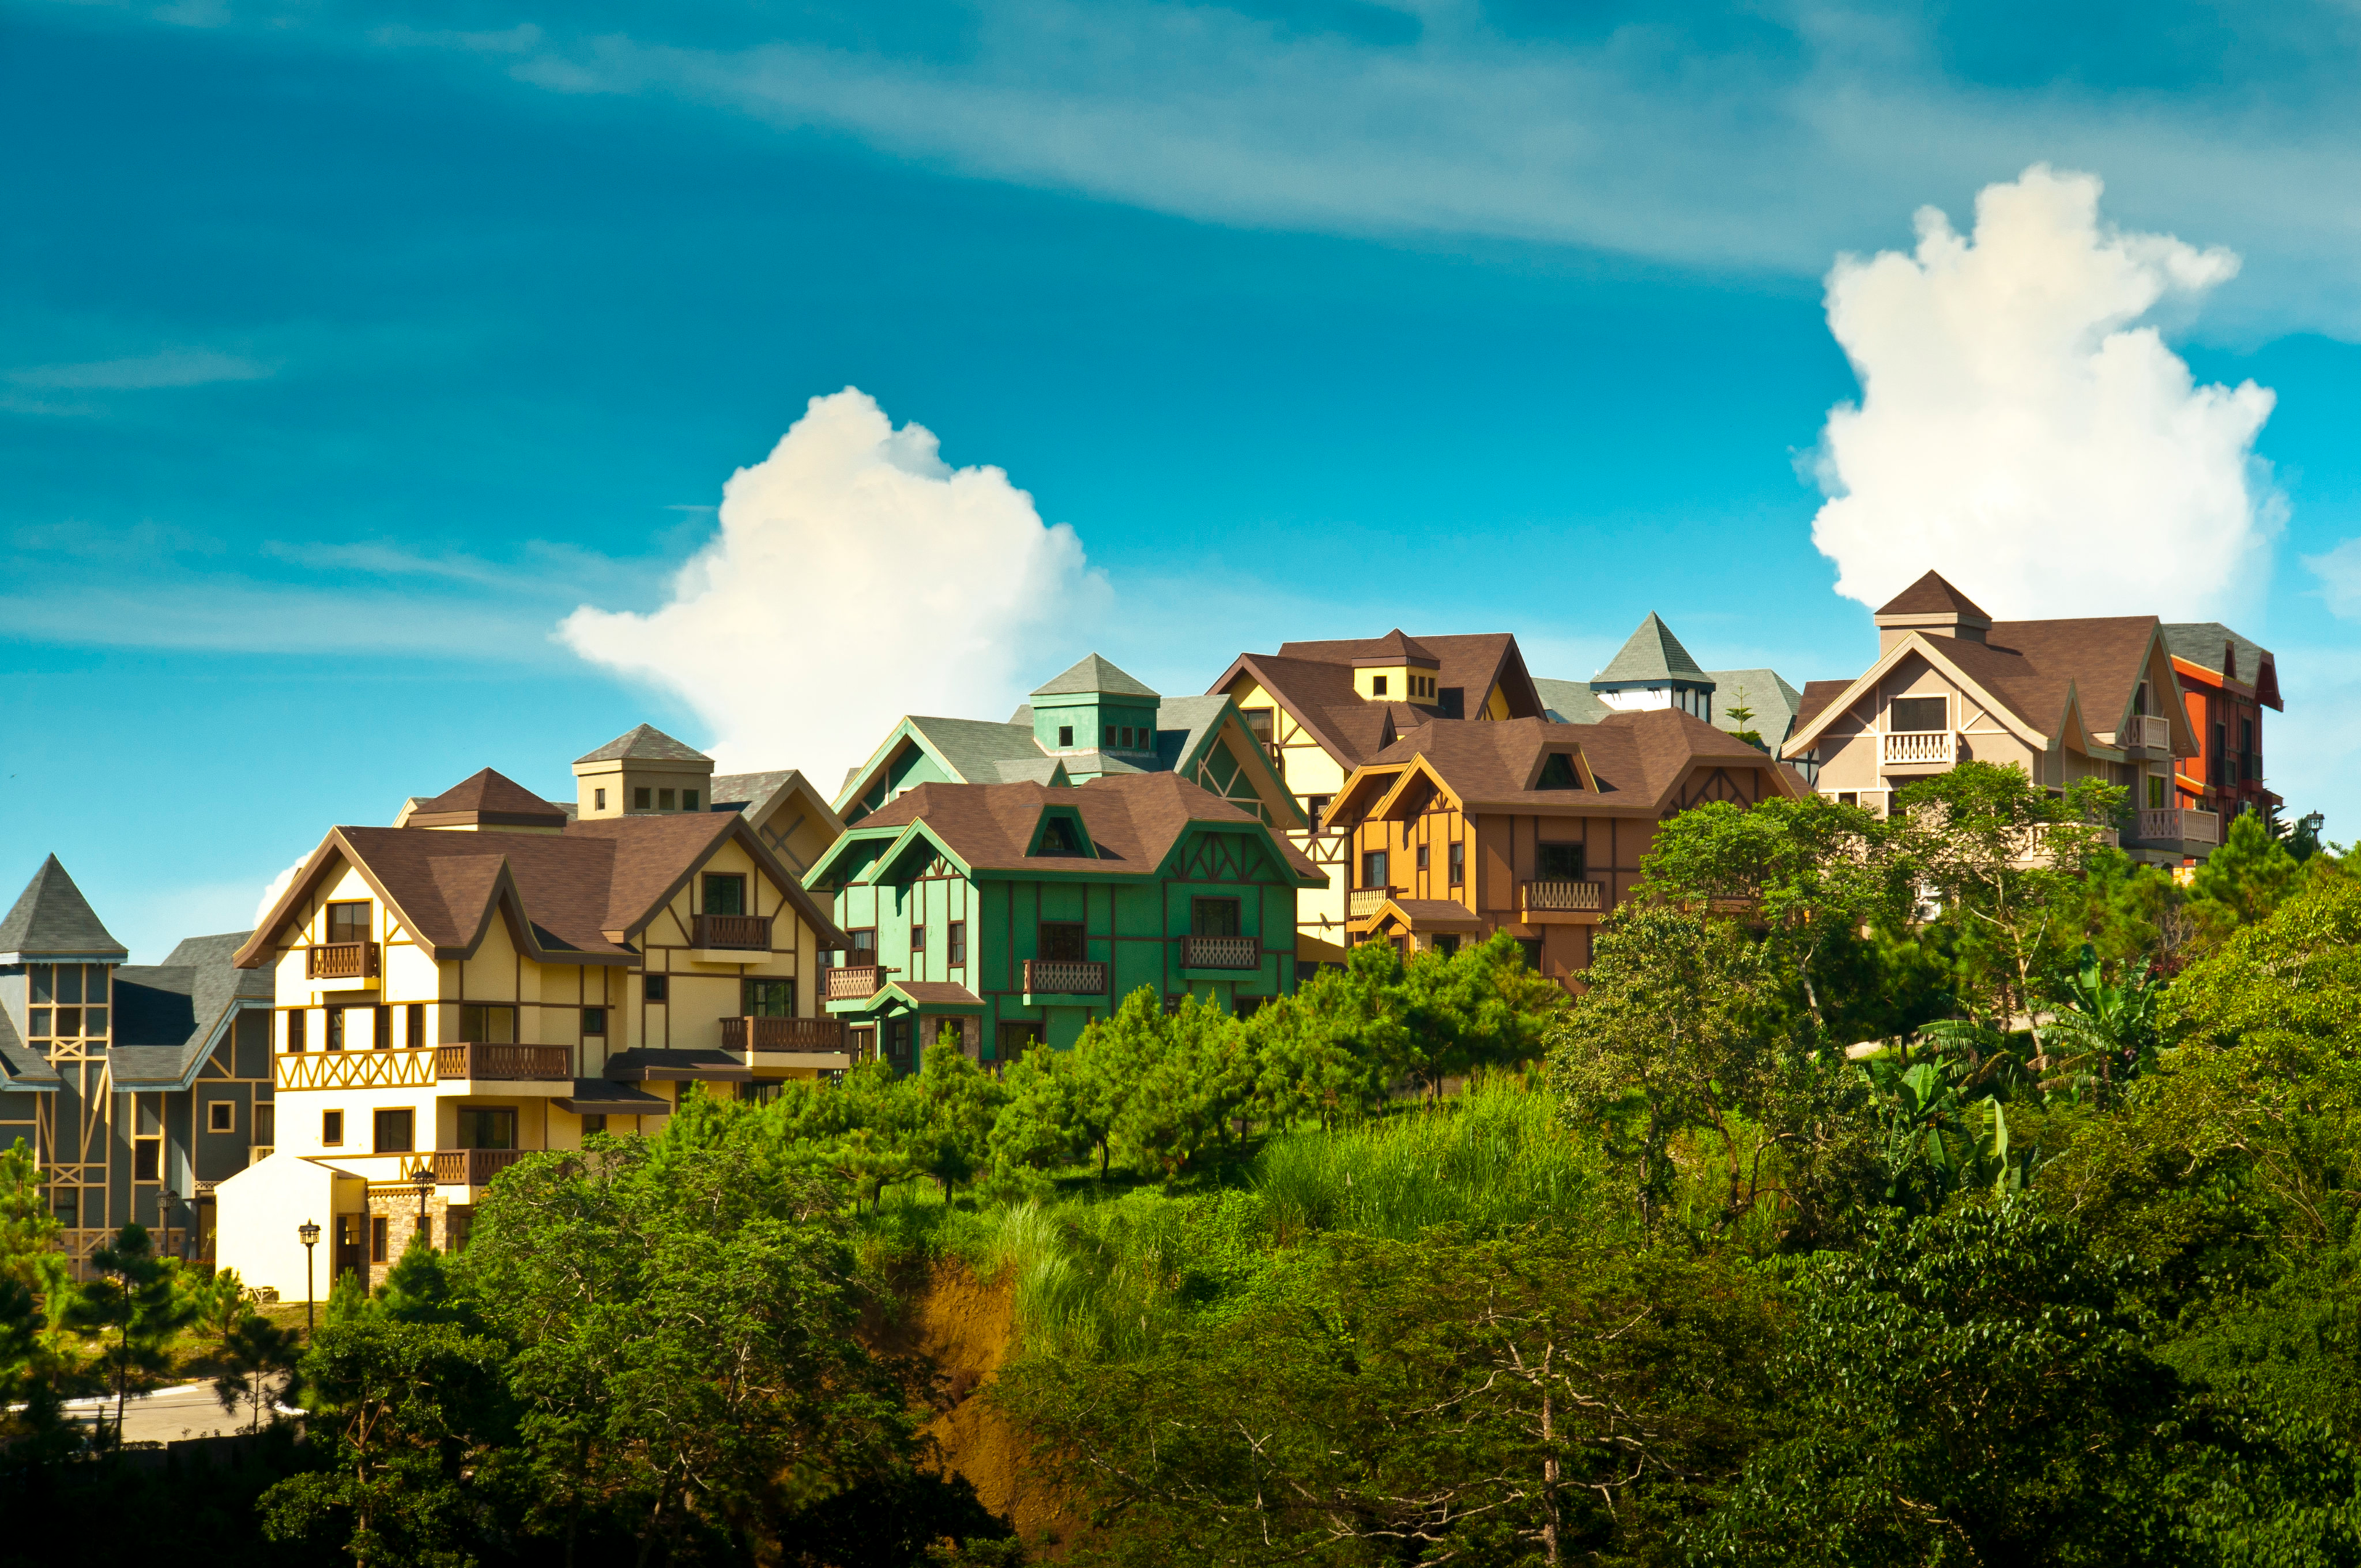 Luxury homes and luxury condo in Crosswinds Tagaytay are popular for staycations